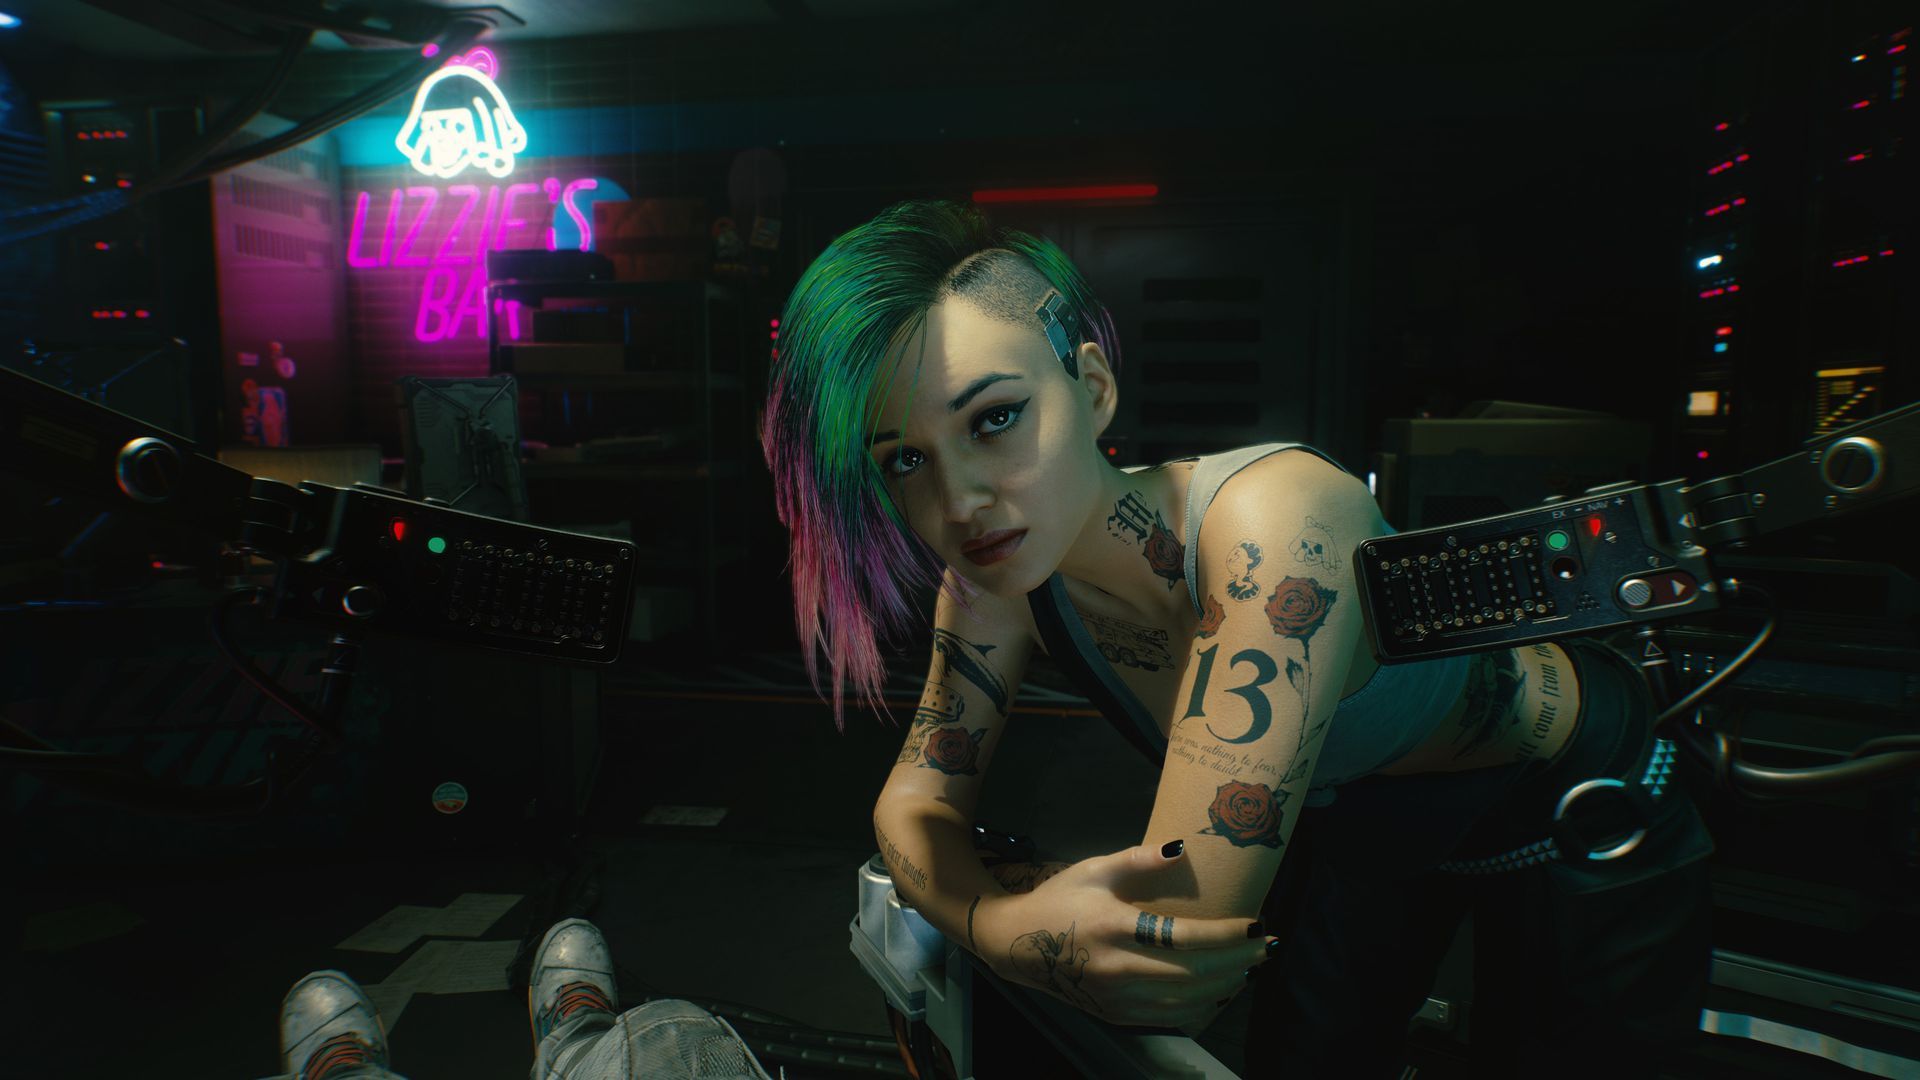 A screenshot from a video game scene with a tattooed woman with a partially shaved head poses in a dark room.